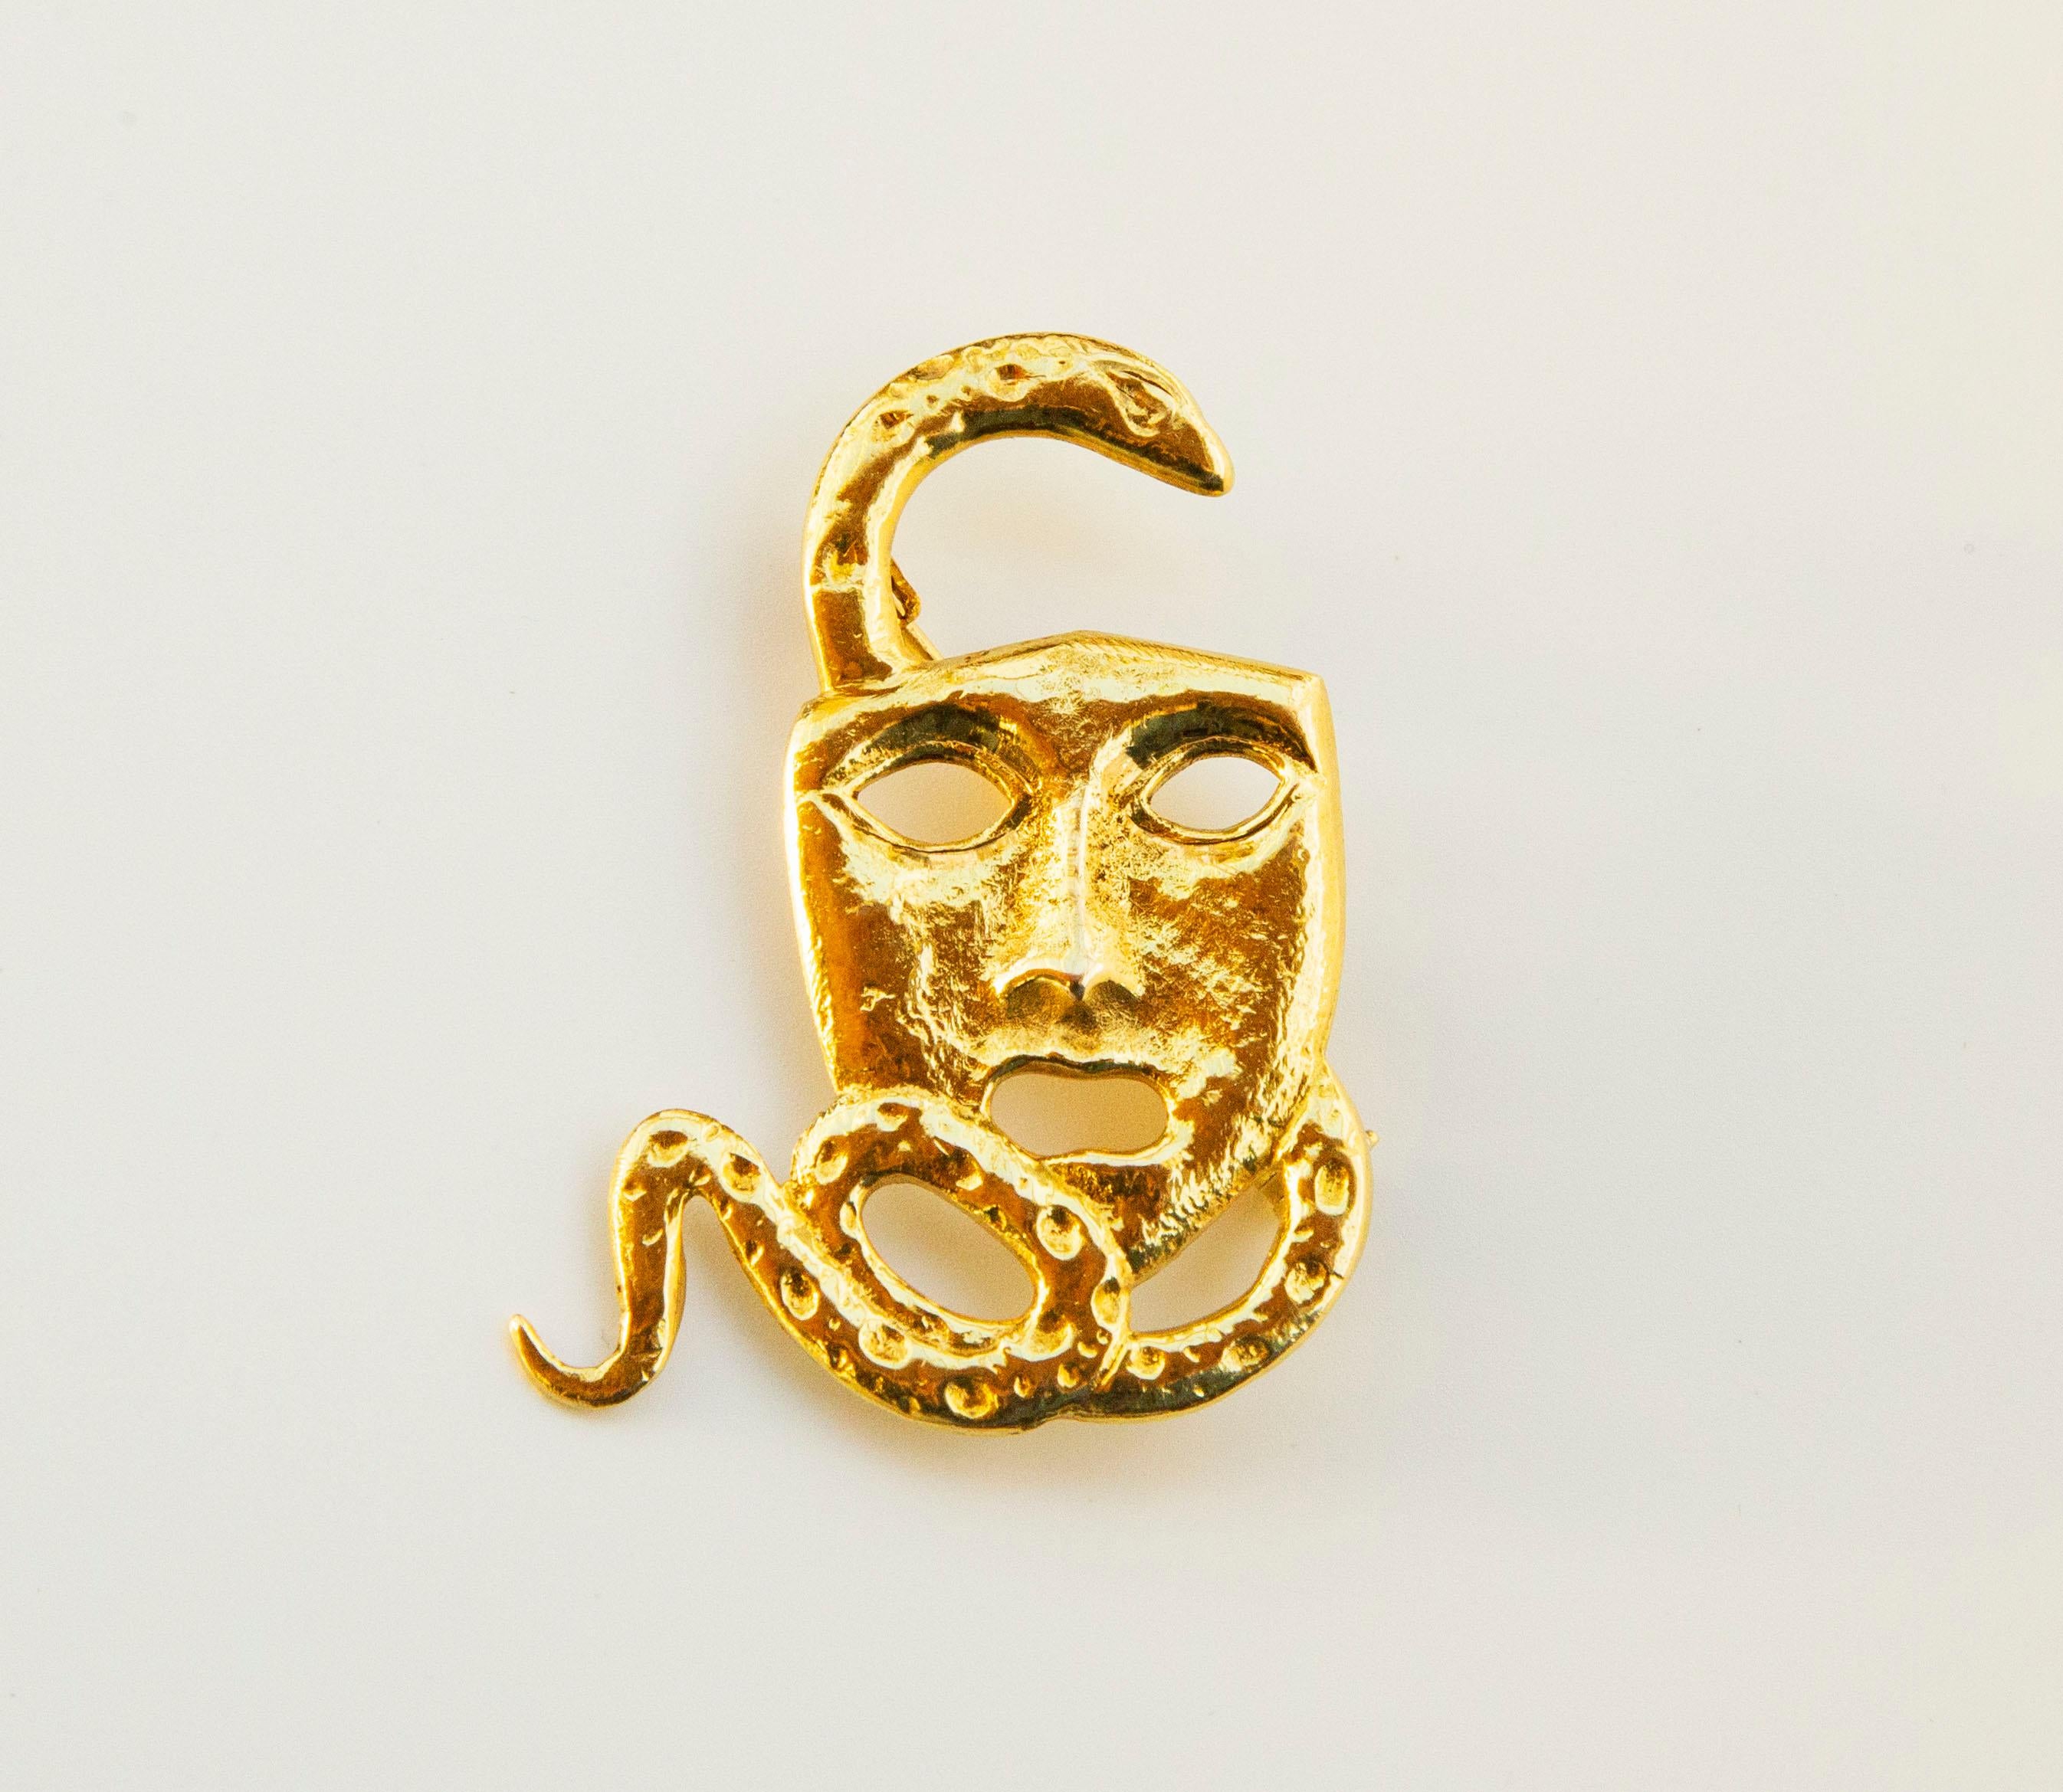 A 18 karat yellow gold designed as an actor/drama/theater mask with a snake. The mask features a textured and hammered front surface while the back side of the mask is smooth. The brooch was manufactured in late 20th century in the Netherlands.  The